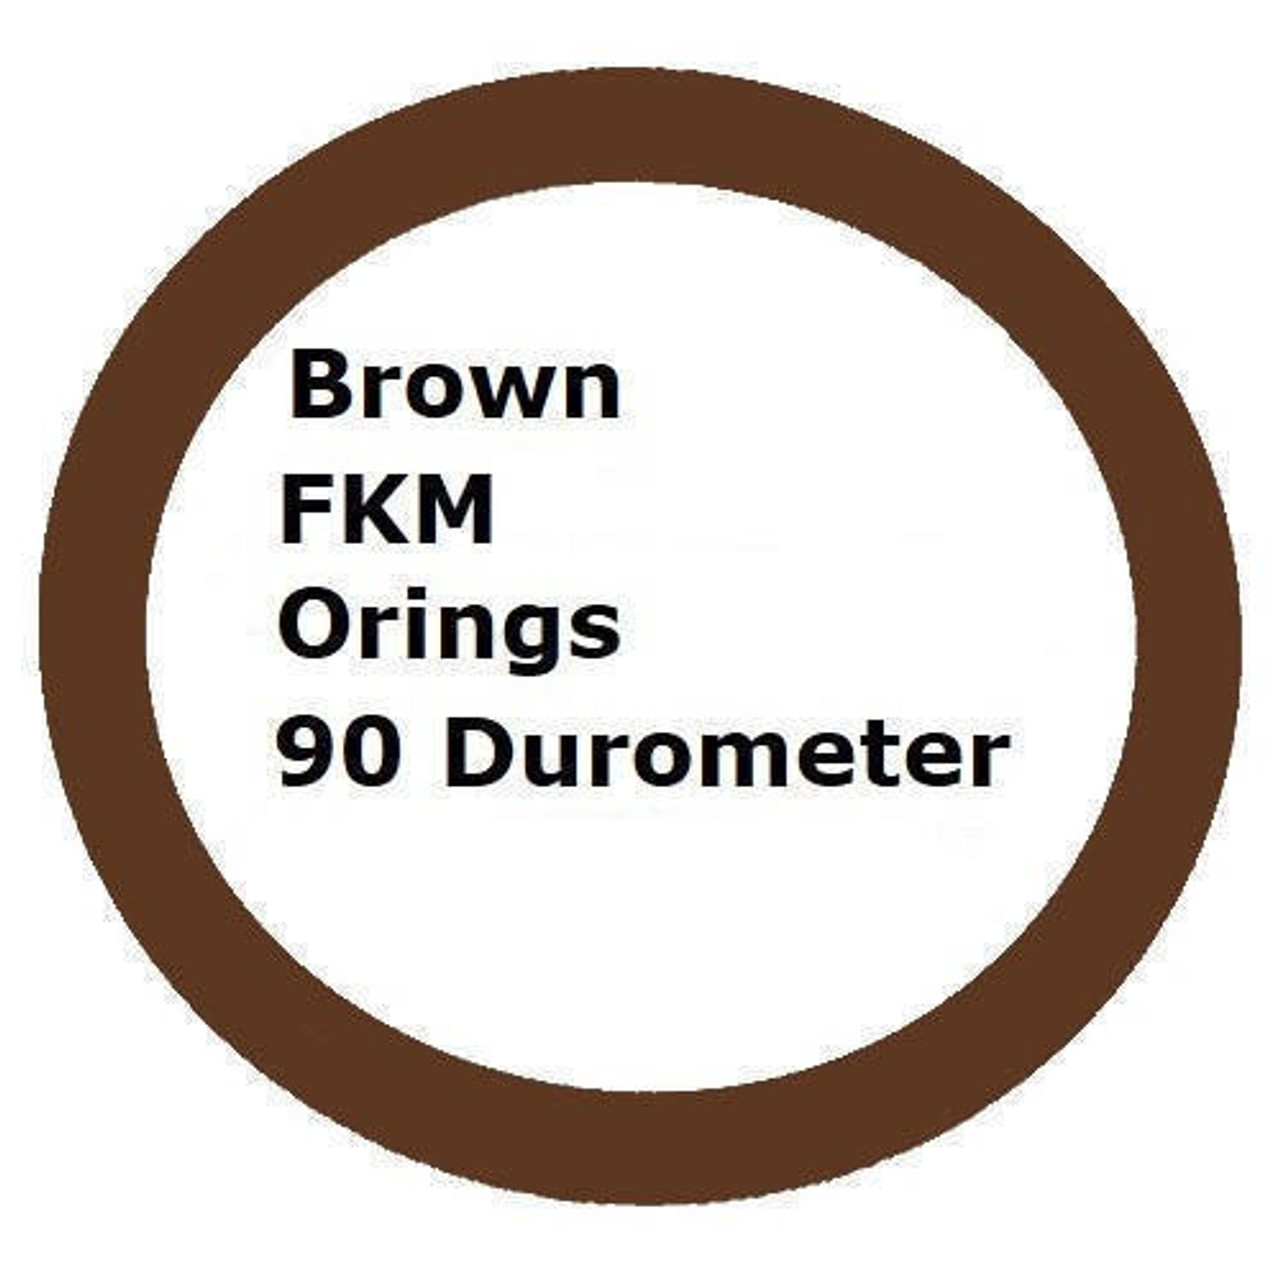 FKM 90 Brown Orings Size 330 Price for 1 pc